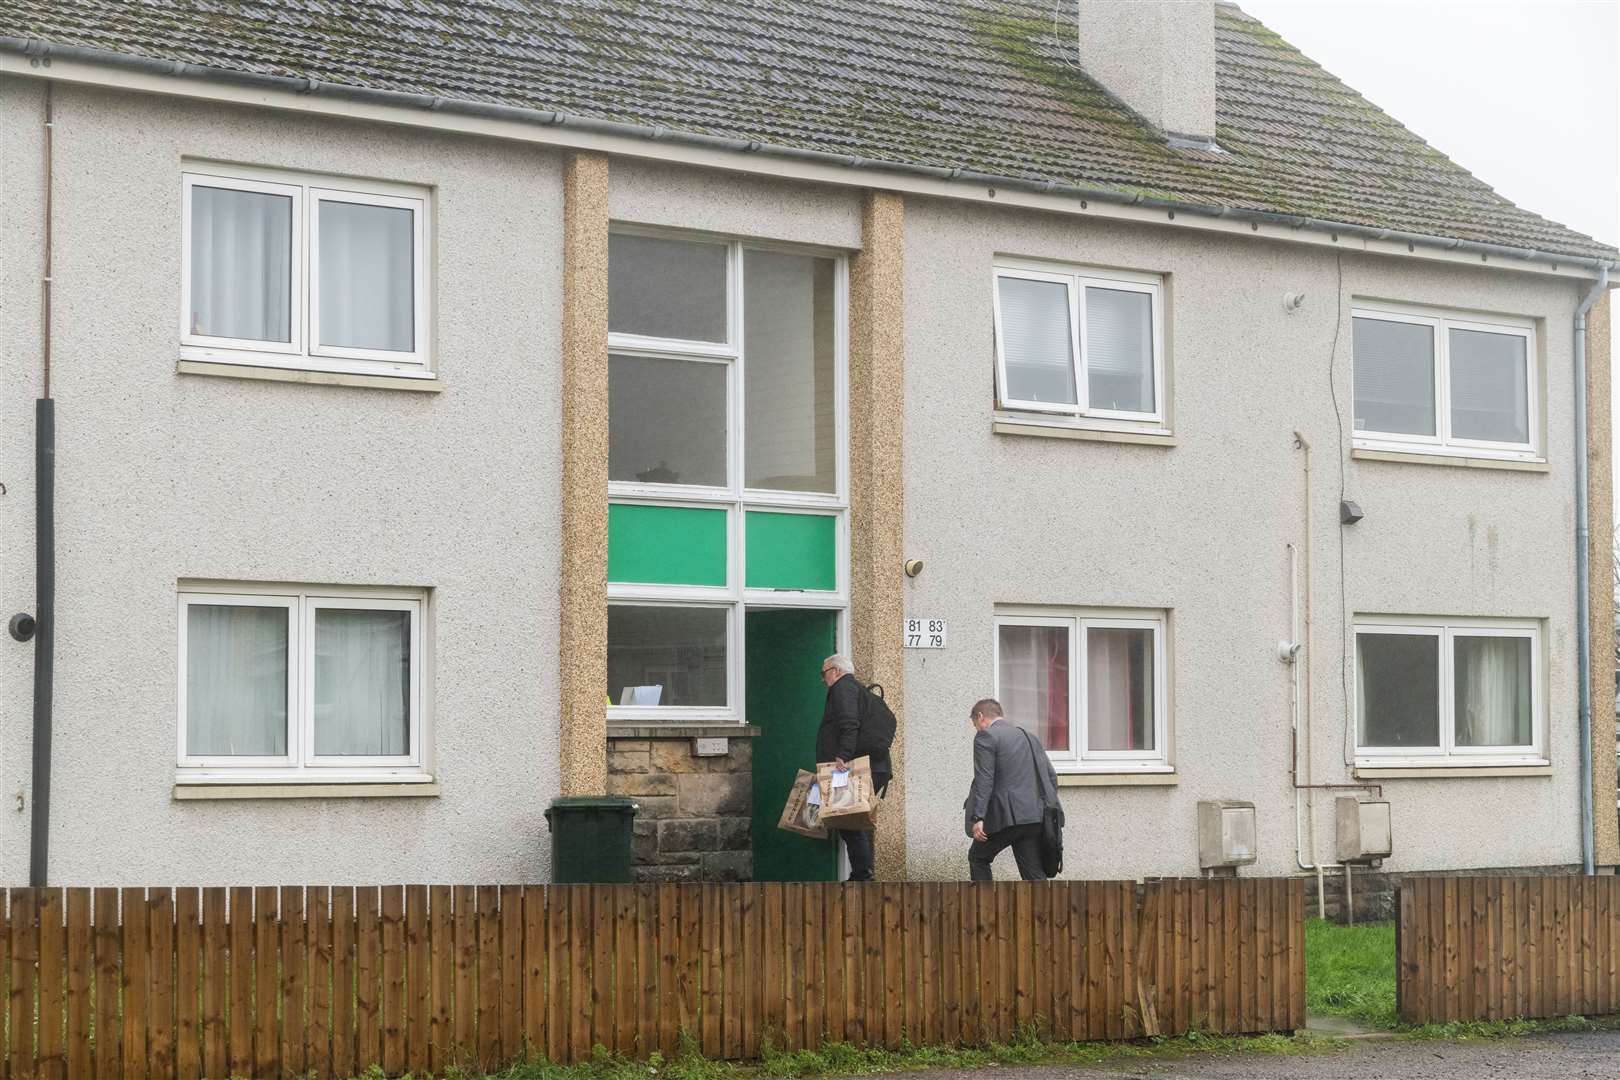 CID officers enter the property in which Kiesha Donaghy was murdered...Picture: Beth Taylor